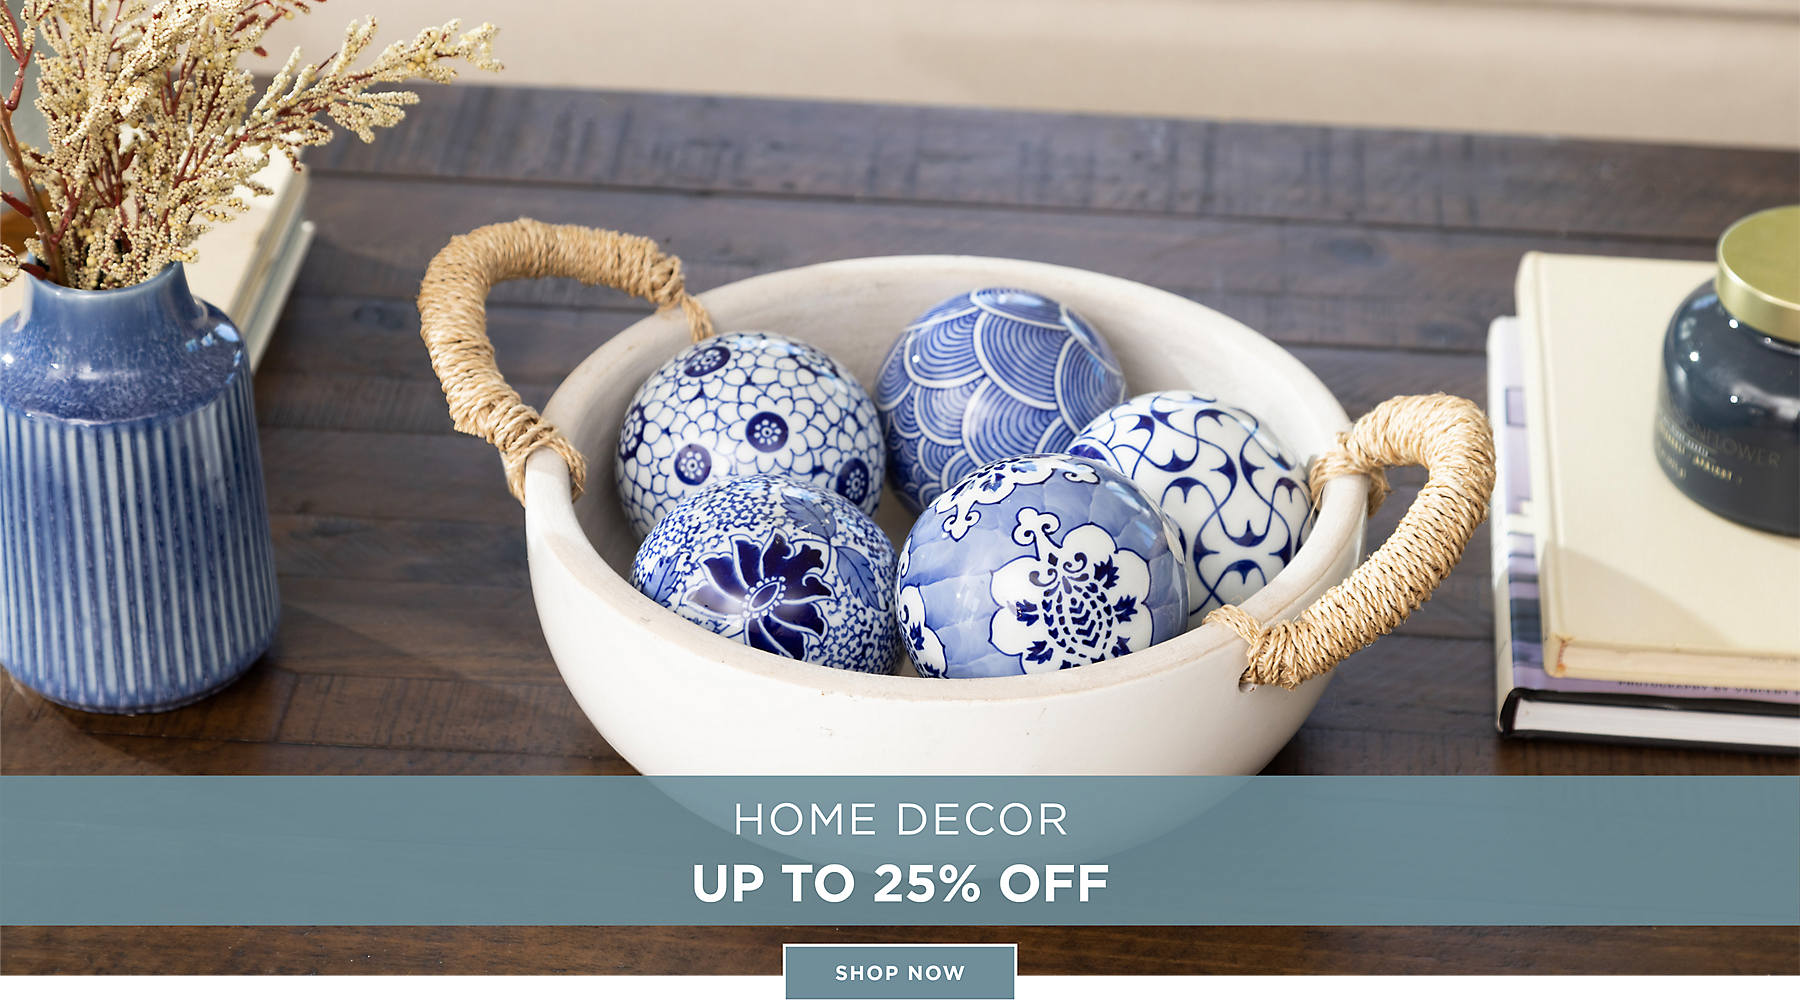 Home Decor Up to 25% Off Shop Now